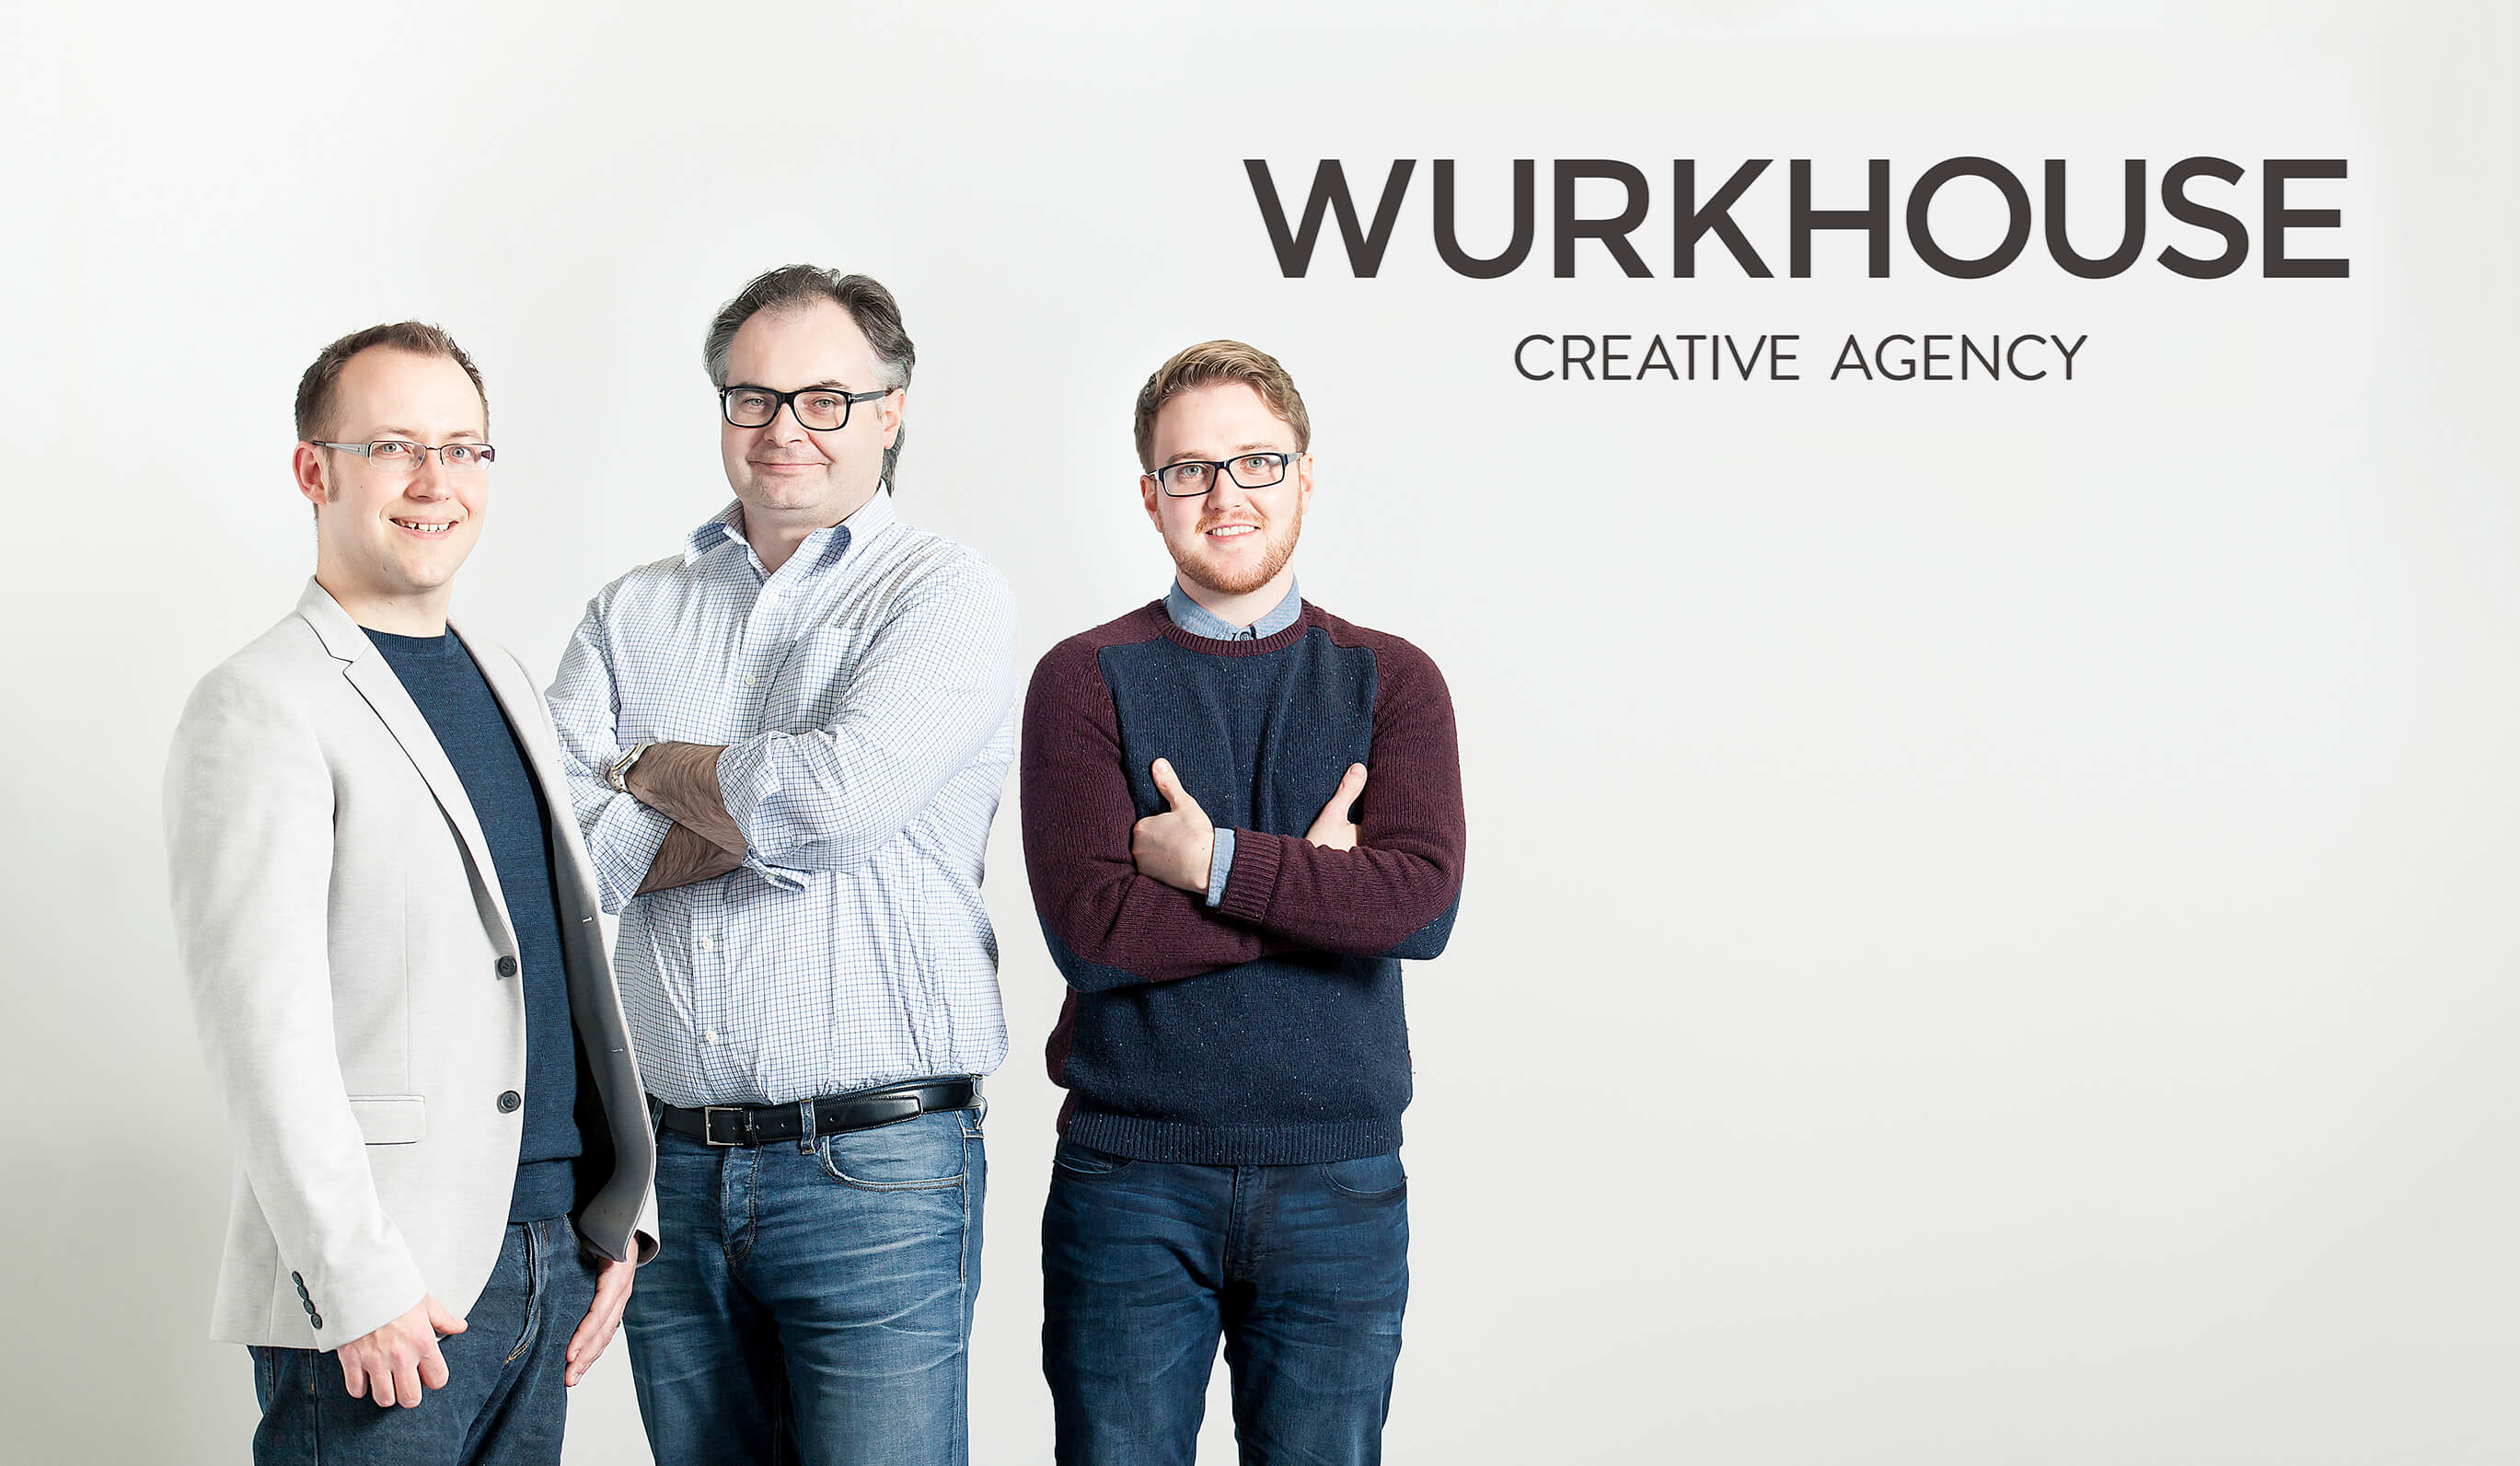 TWO LEADING CREATIVE COMPANIES BASED IN DERRY HAVE JOINED FORCES AS PART OF A GLOBAL EXPANSION BY WURKHOUSE.jpg